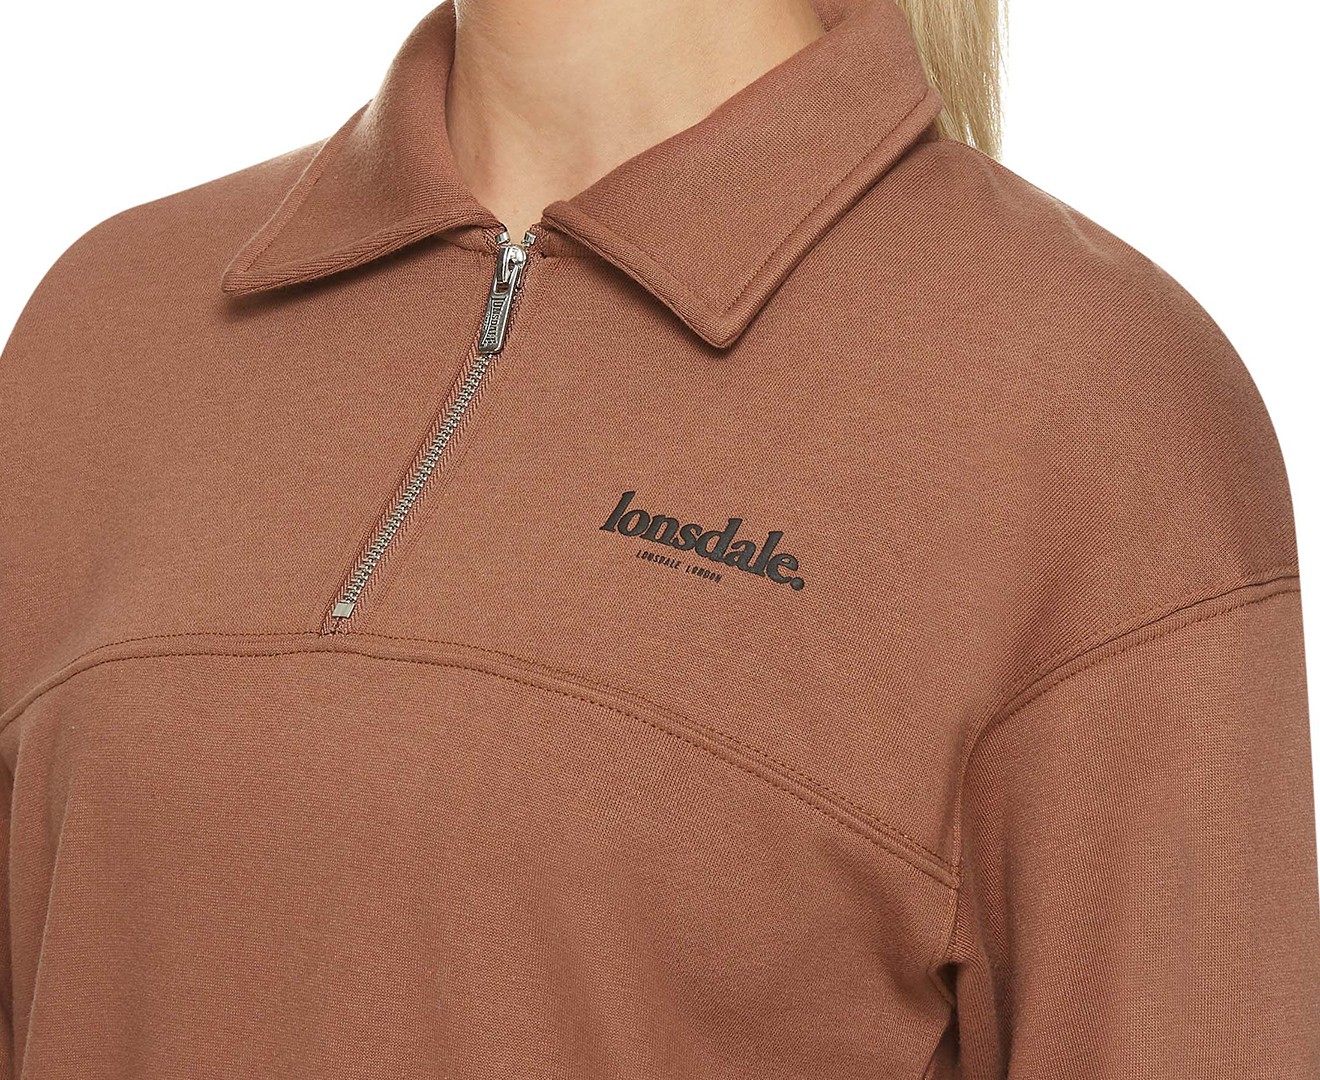 Lonsdale Women's Penfold Collared Sweat - Sepia